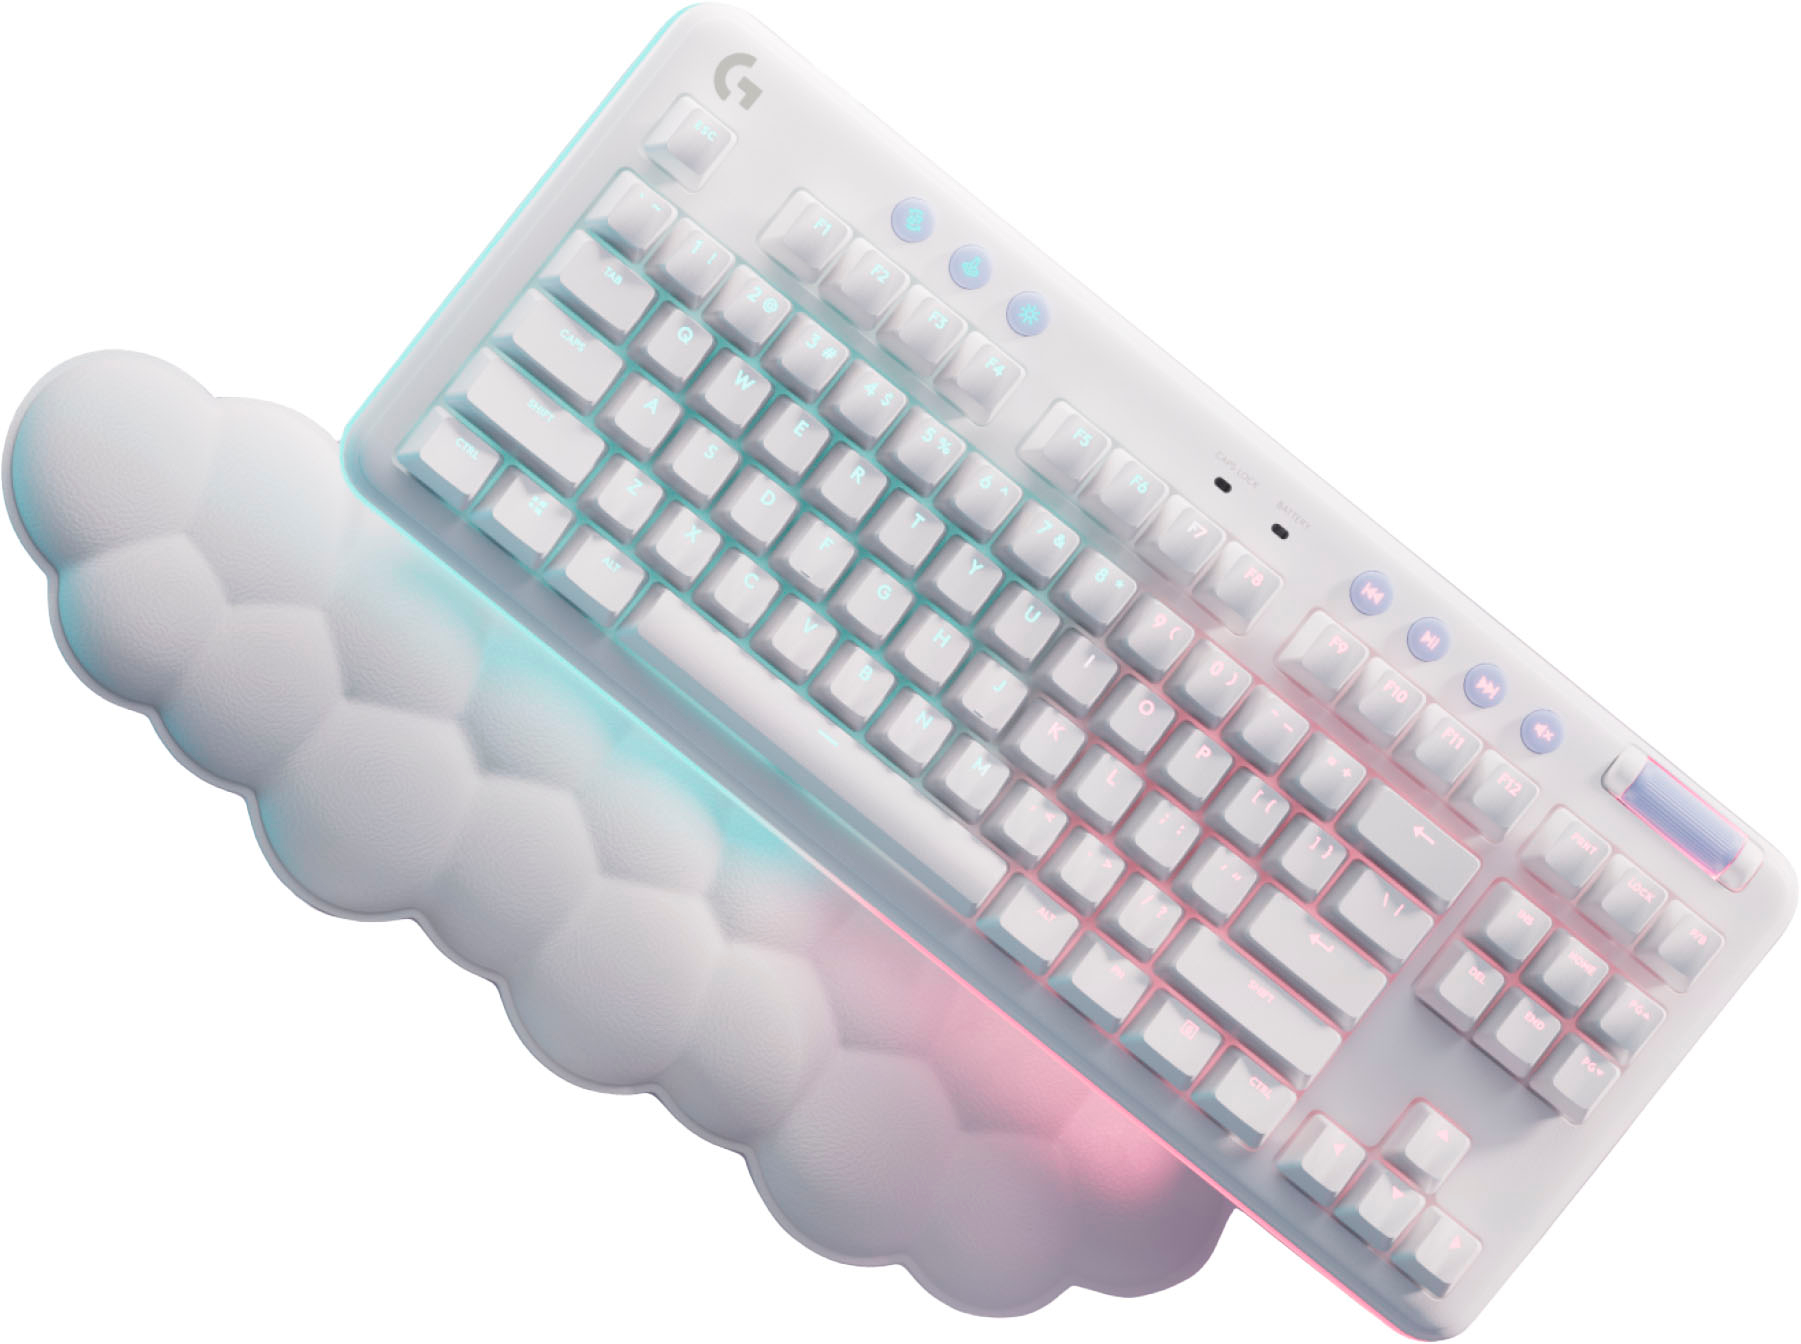 Logitech G715 Aurora Collection TKL Wireless Mechanical Tactile Switch  Gaming Keyboard for PC/Mac with Palm Rest Included White Mist 920-010453 -  Best Buy